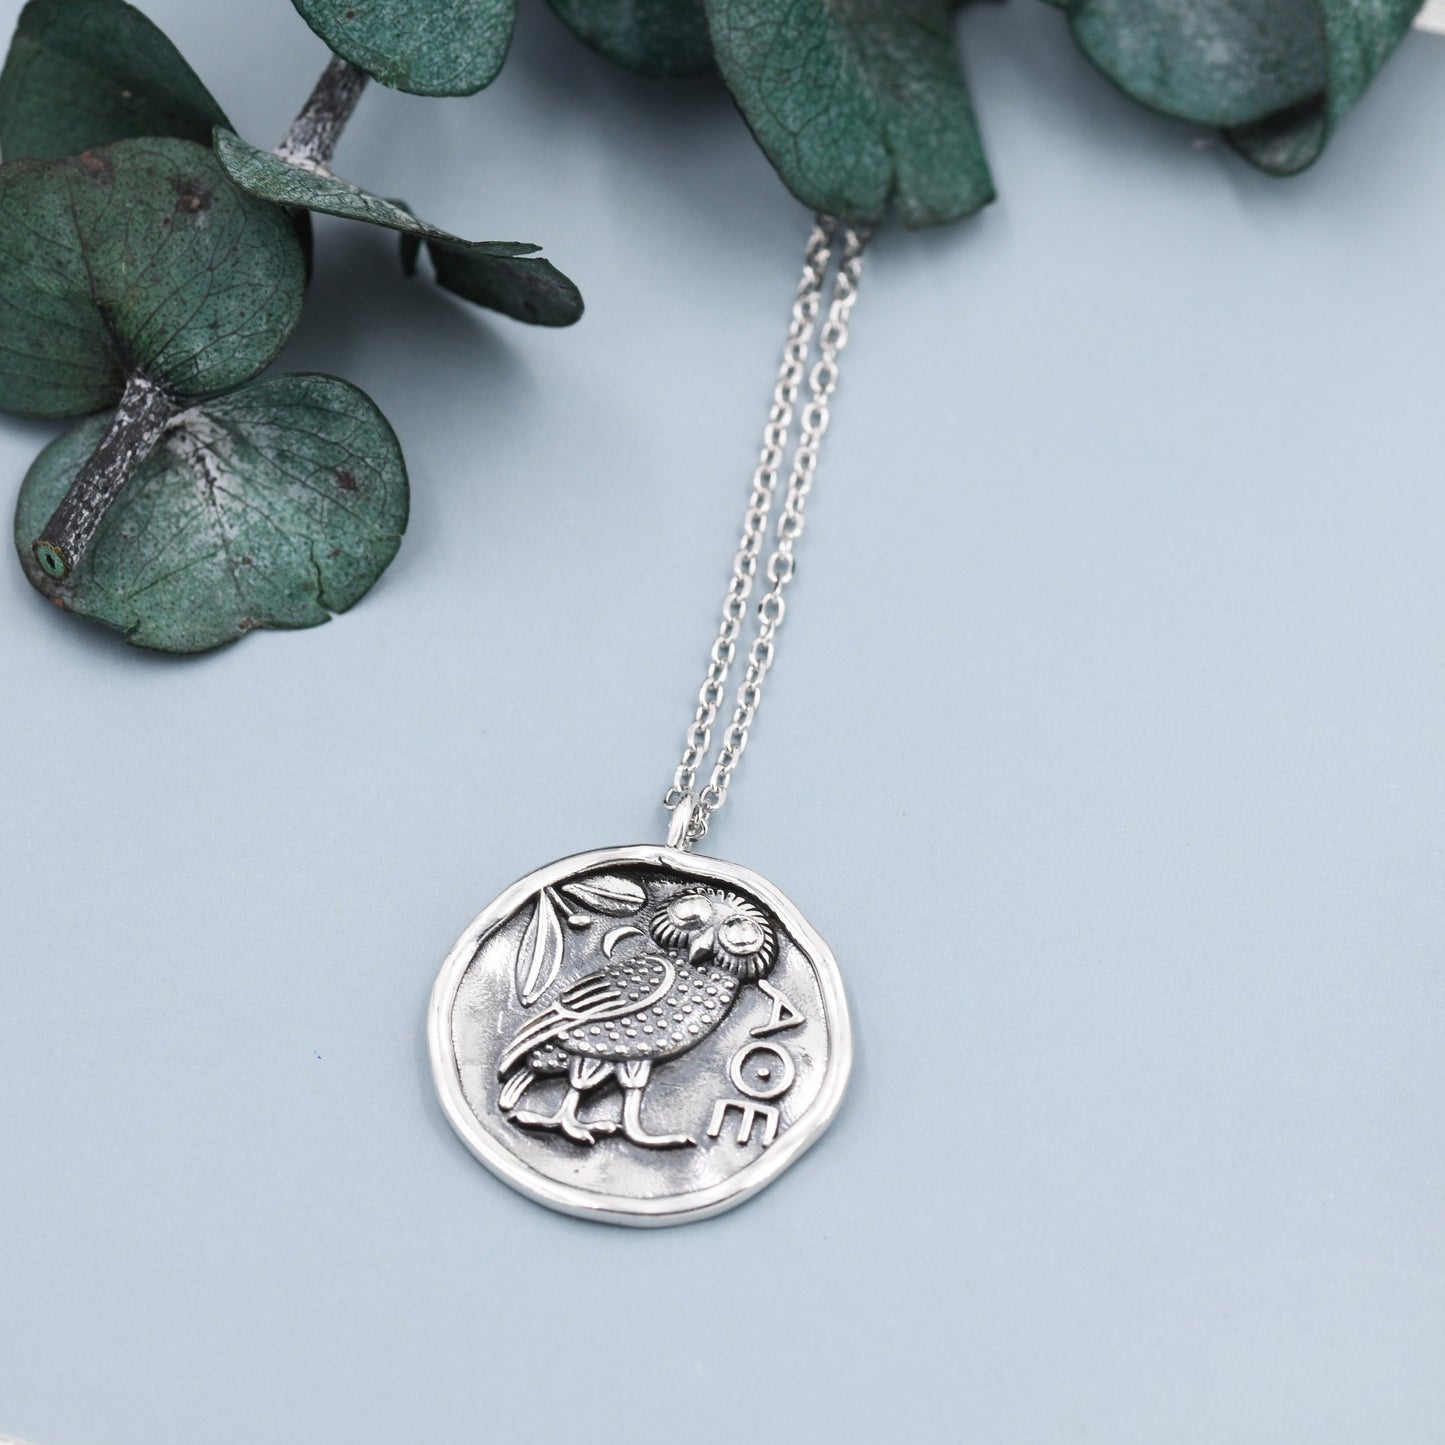 Sterling Silver Greek Coin Pendant Necklace - Owl Coin Necklace , Owl of Athena Coin Necklace in Silver, Ancient Greek Coin Inspired